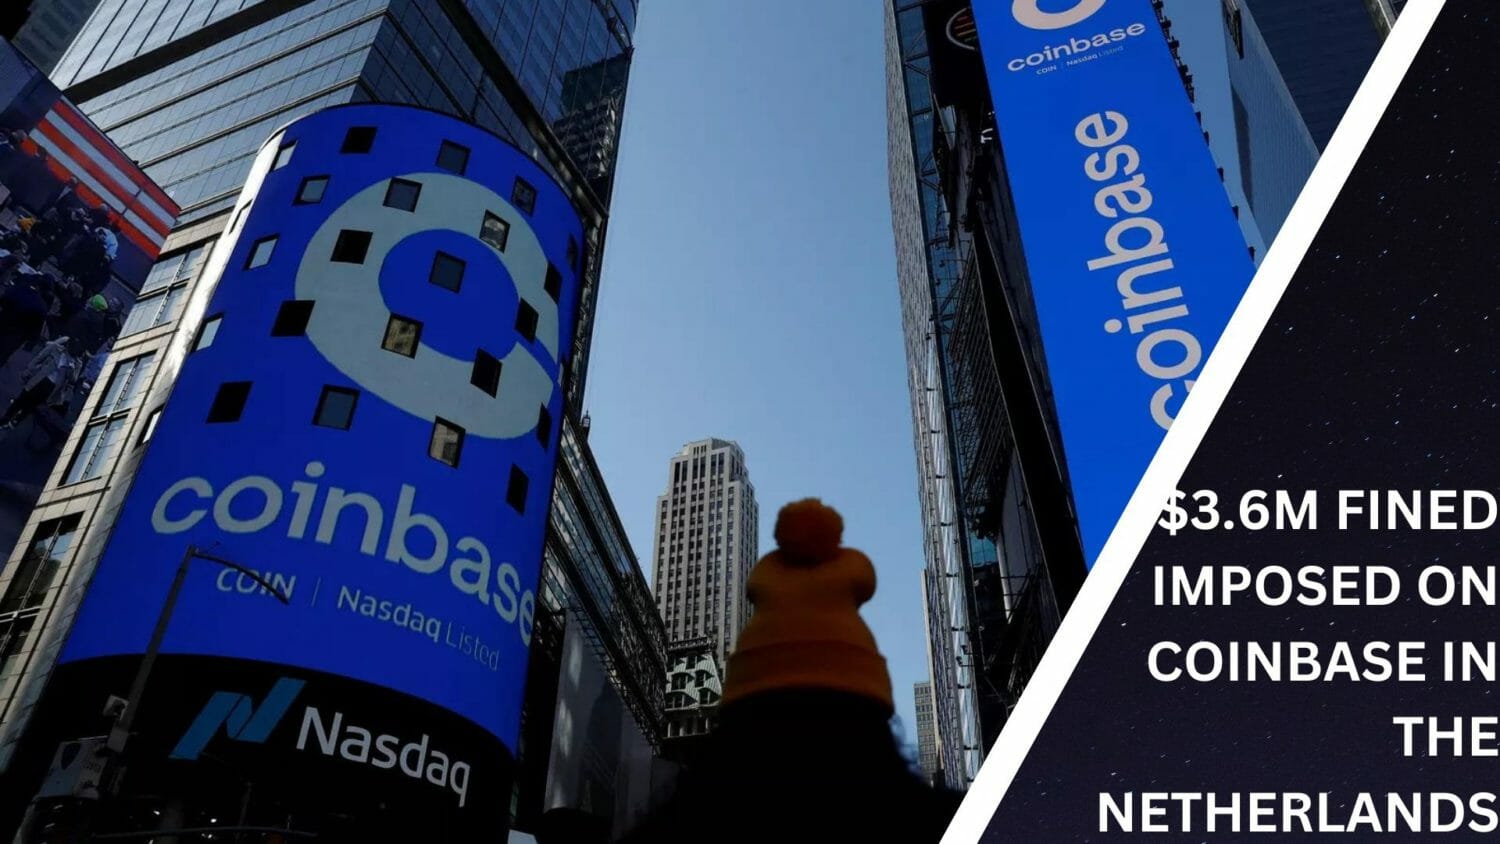 $3.6M Fined Imposed On Coinbase In The Netherlands